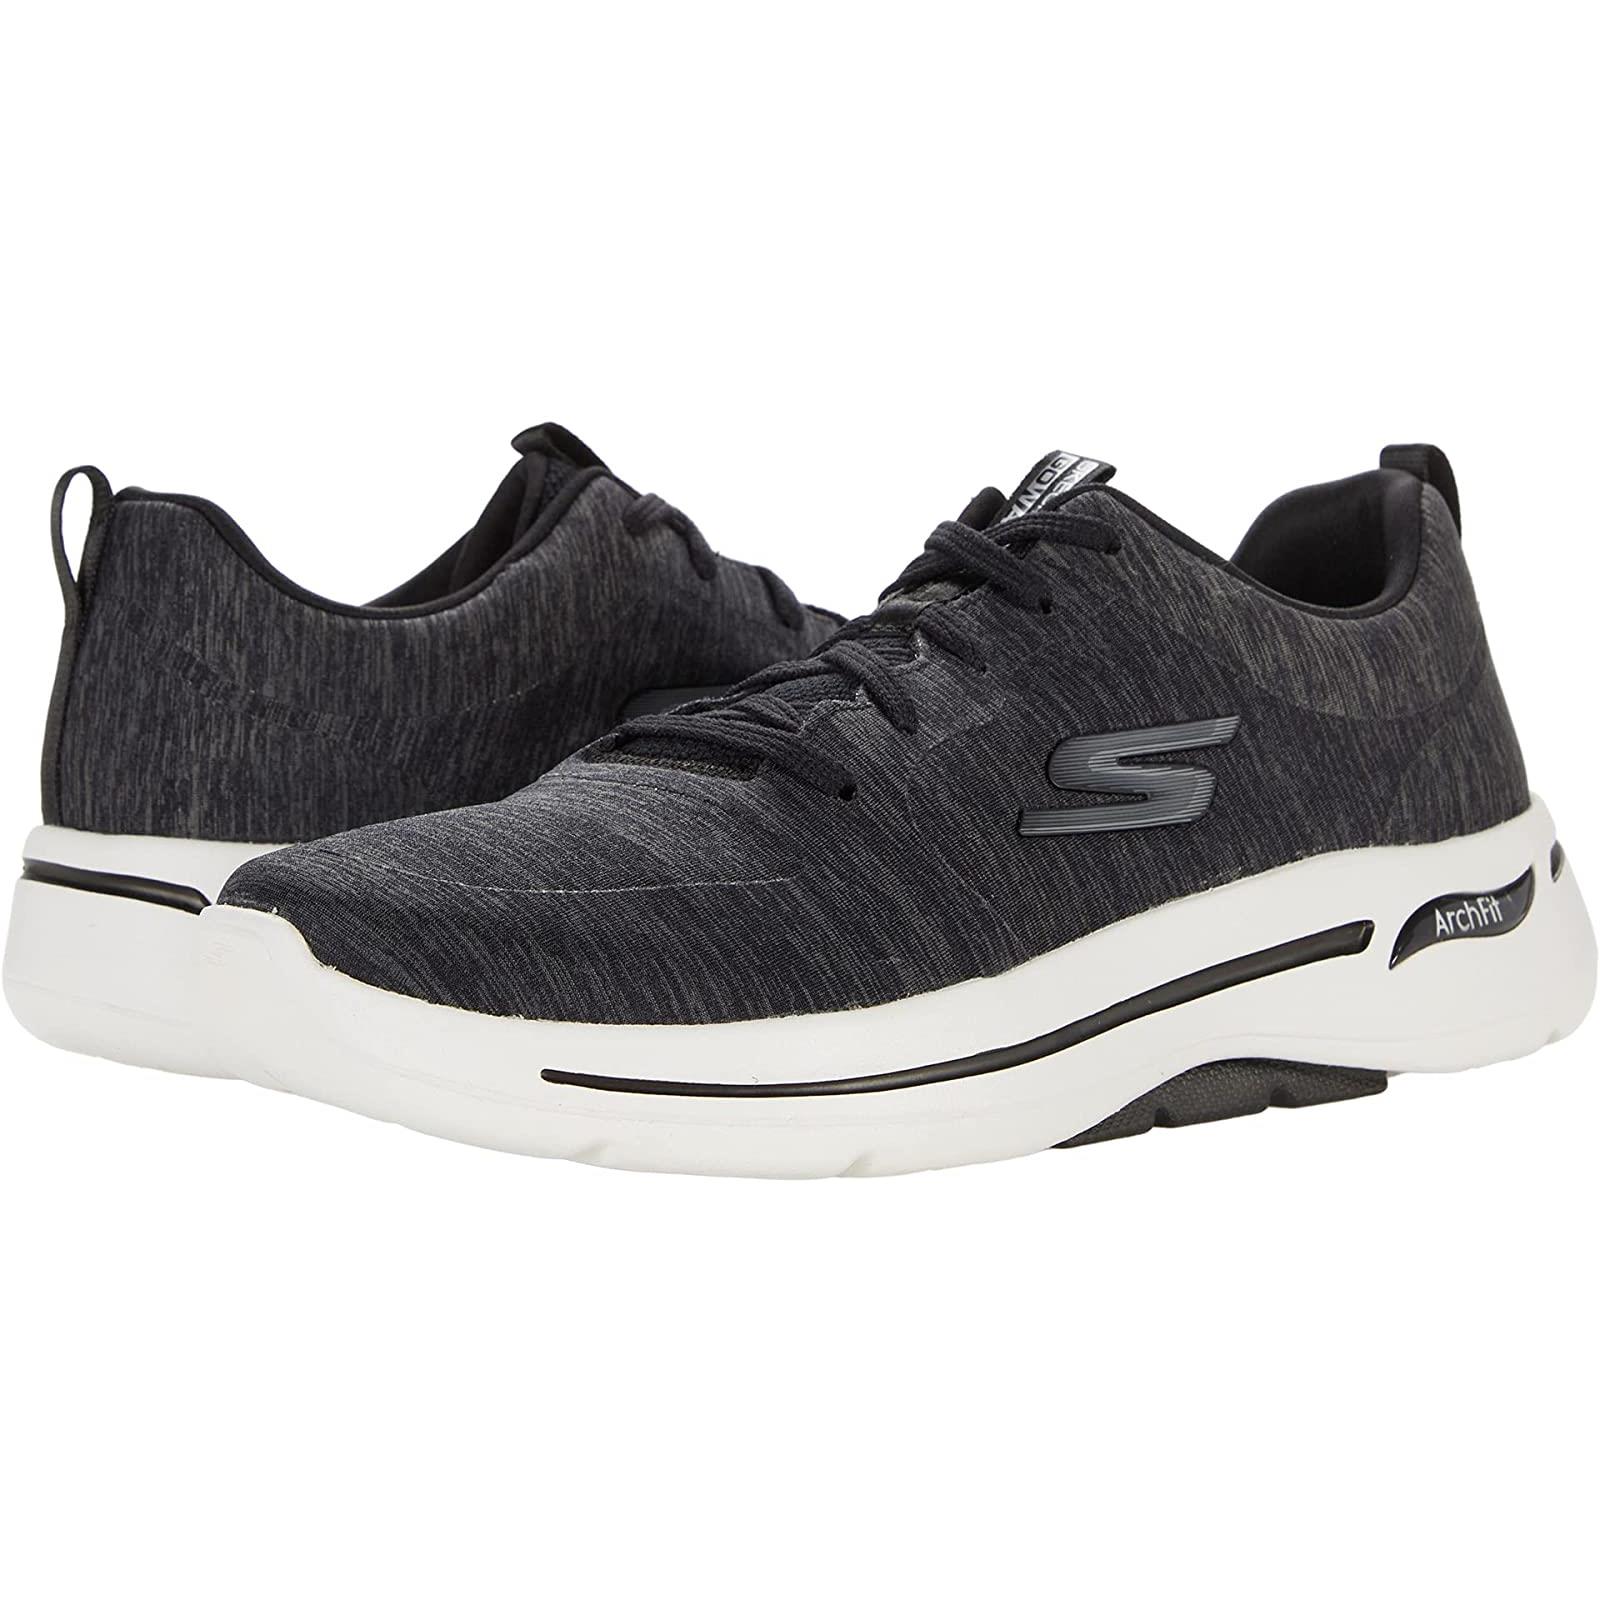 Woman`s Shoes Skechers Performance Go Walk Arch Fit Moon Shadows Black/White